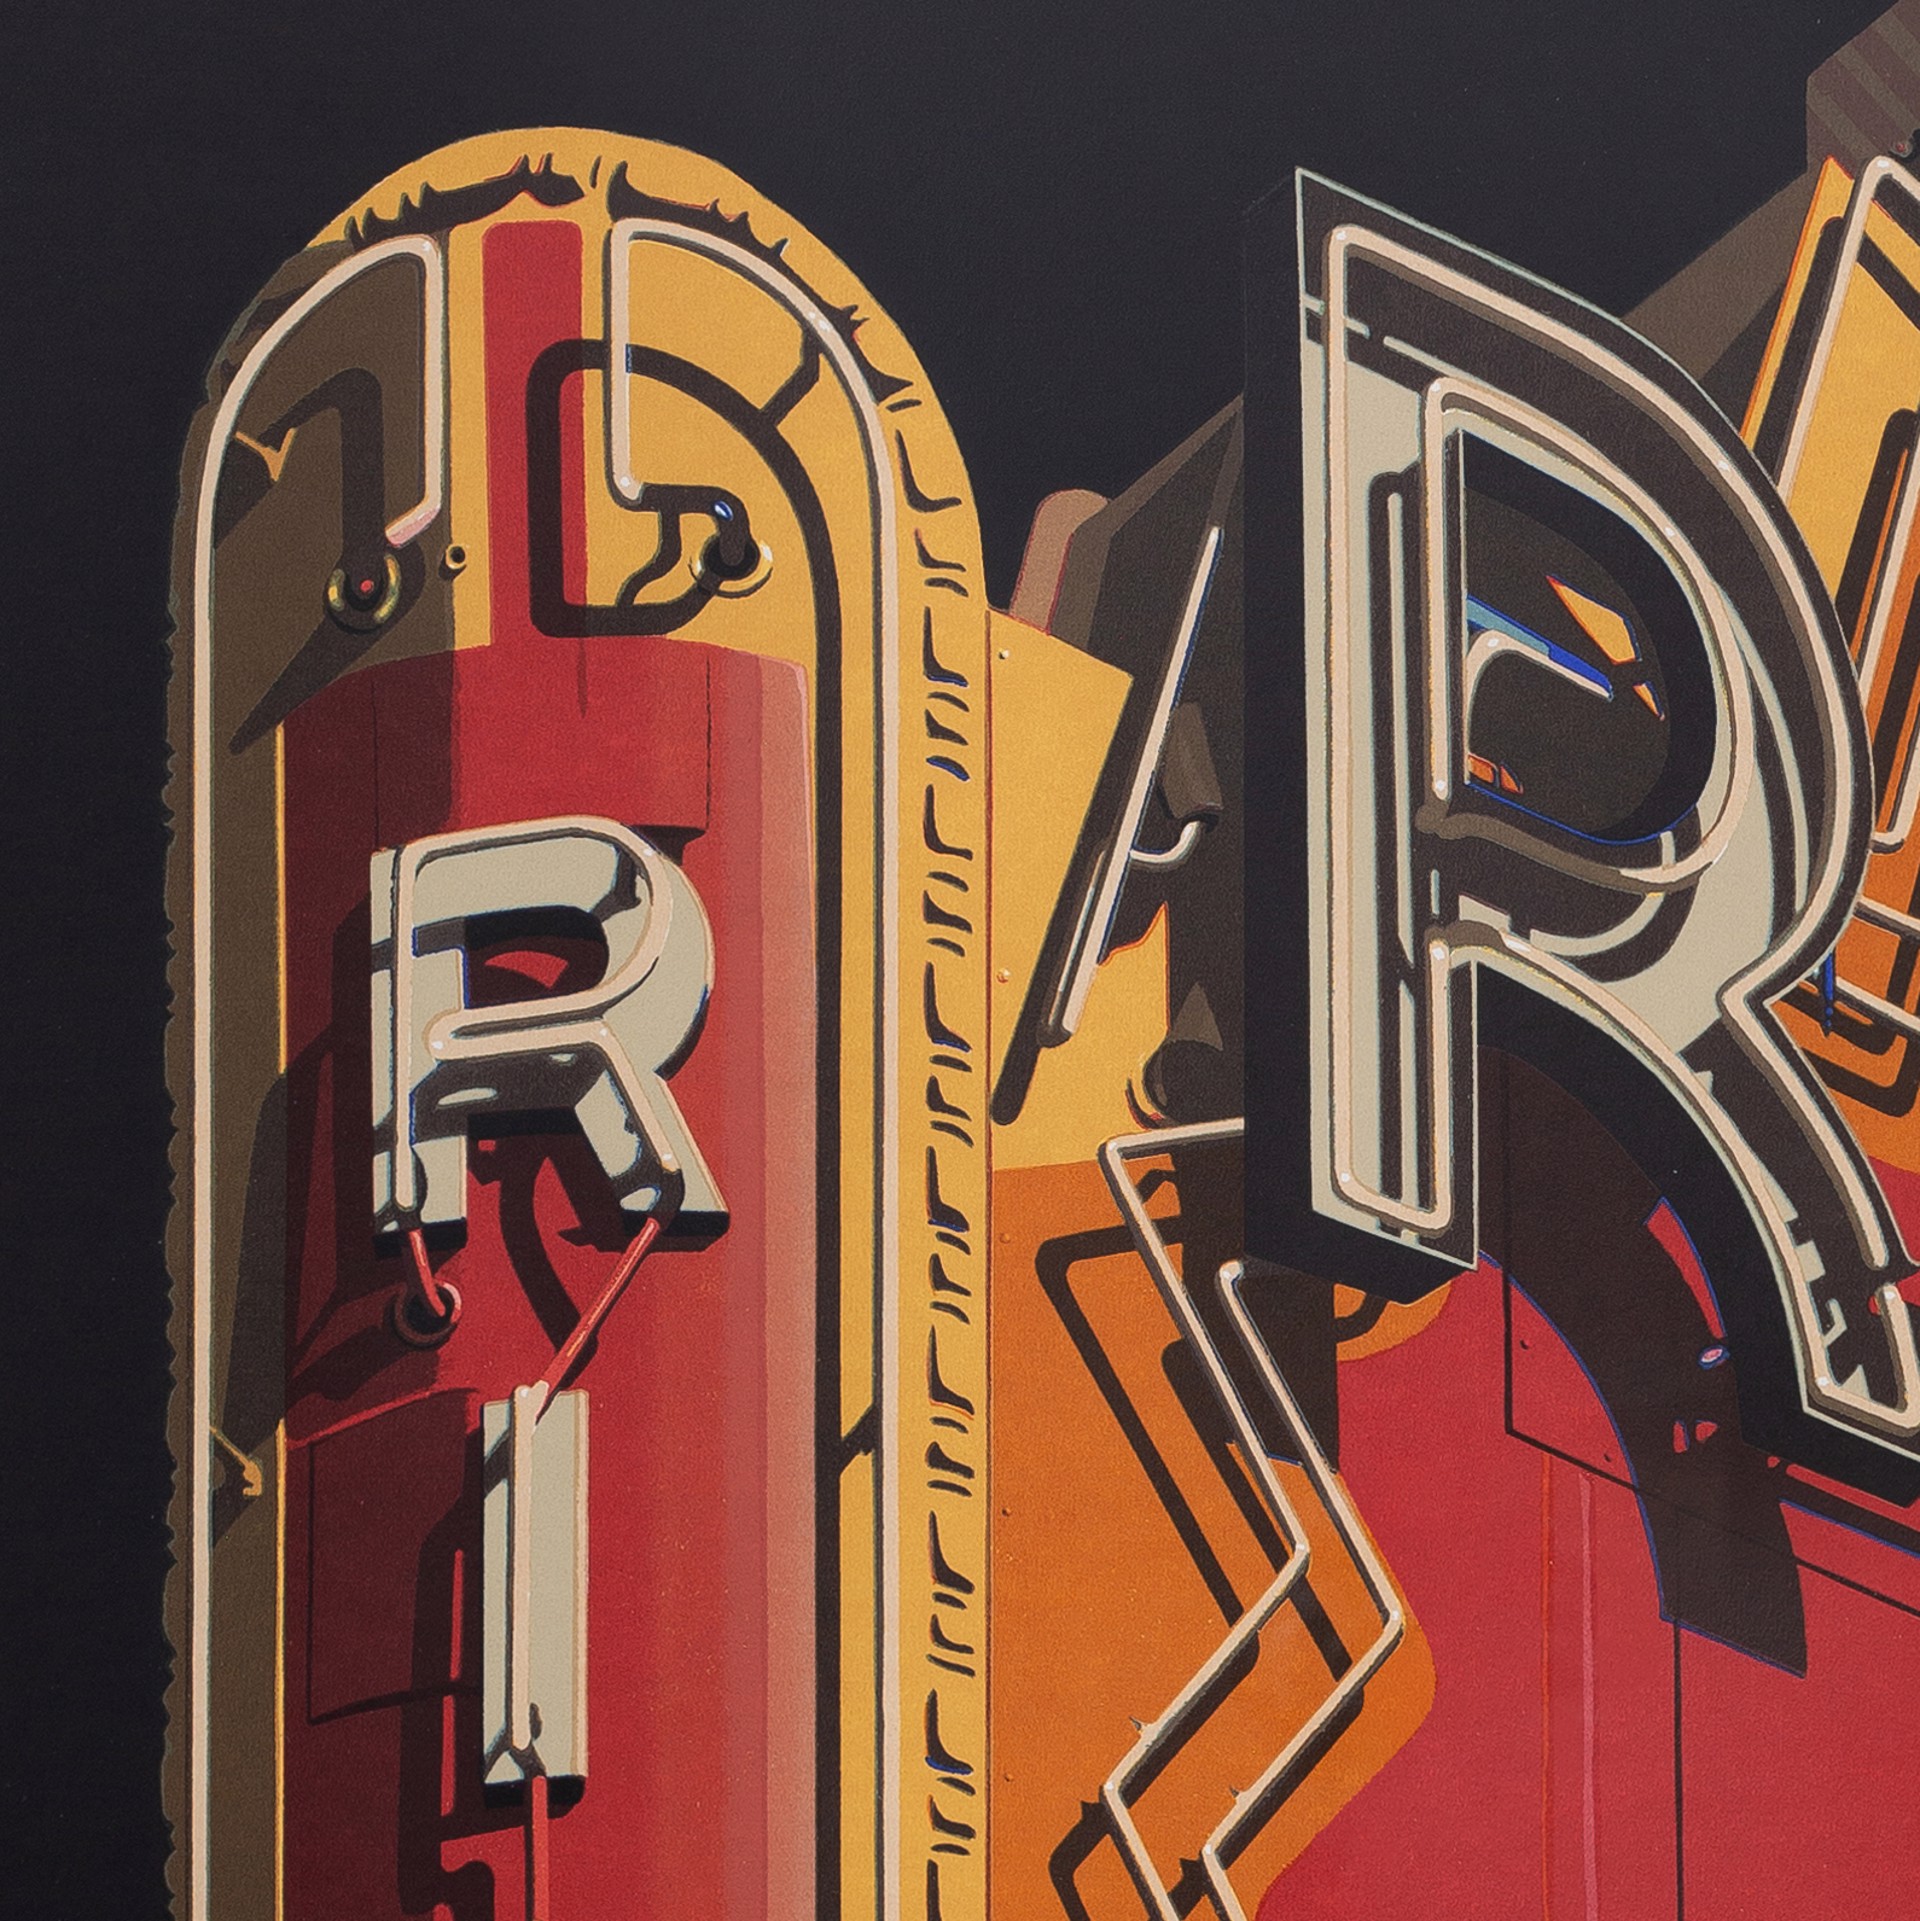 Rialto (from American Signs portfolio) by Robert Cottingham